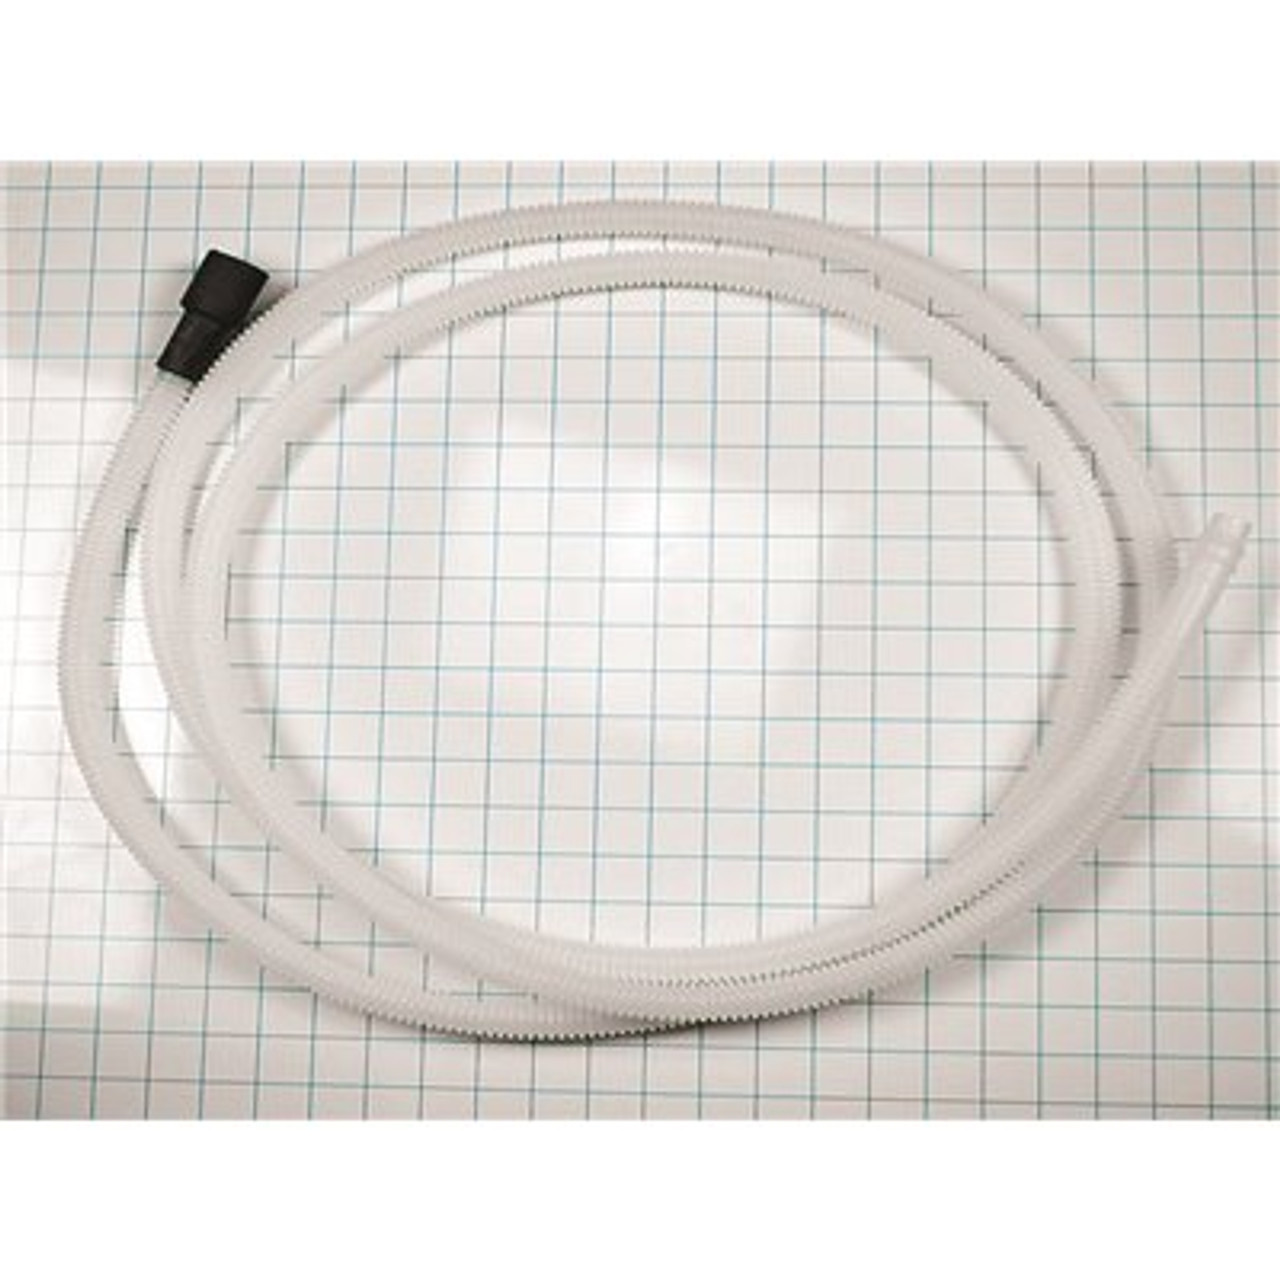 WHIRLPOOL Replacement Drain Hose For Dishwashers, Part# 3385556